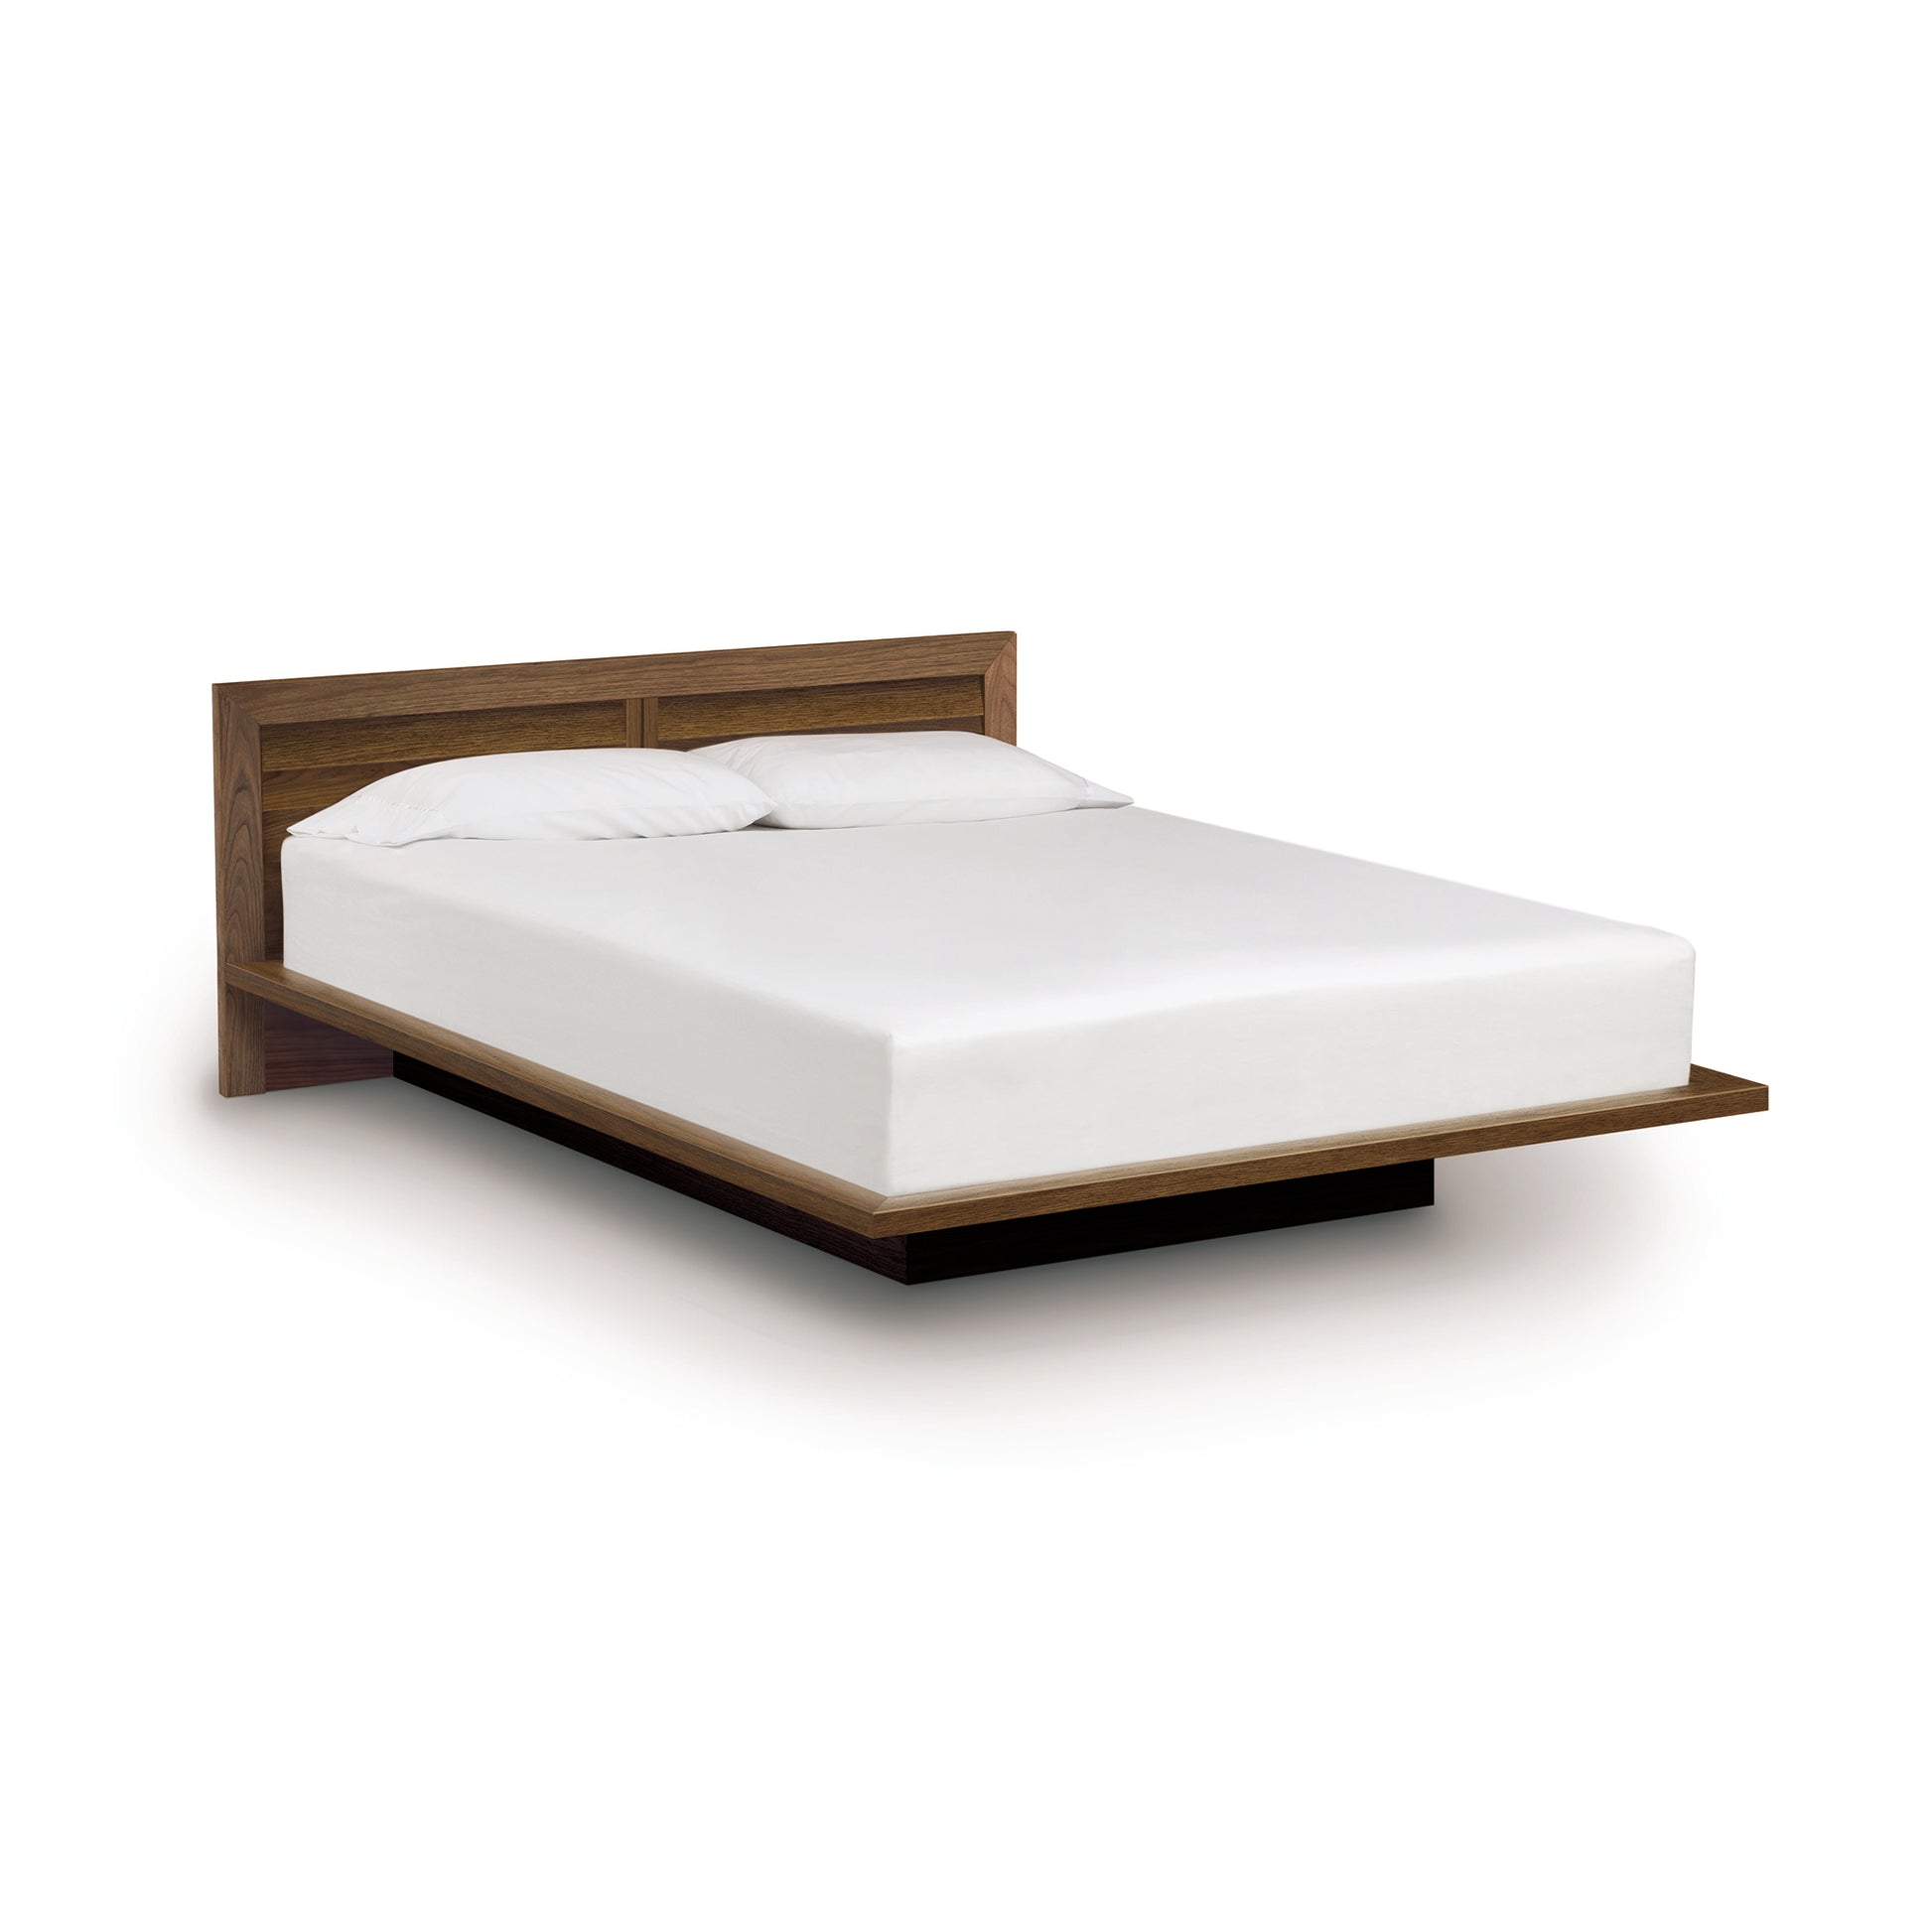 A Copeland Furniture Moduluxe Platform Bed with Clapboard Headboard - 29" Series mattress isolated on a white background.